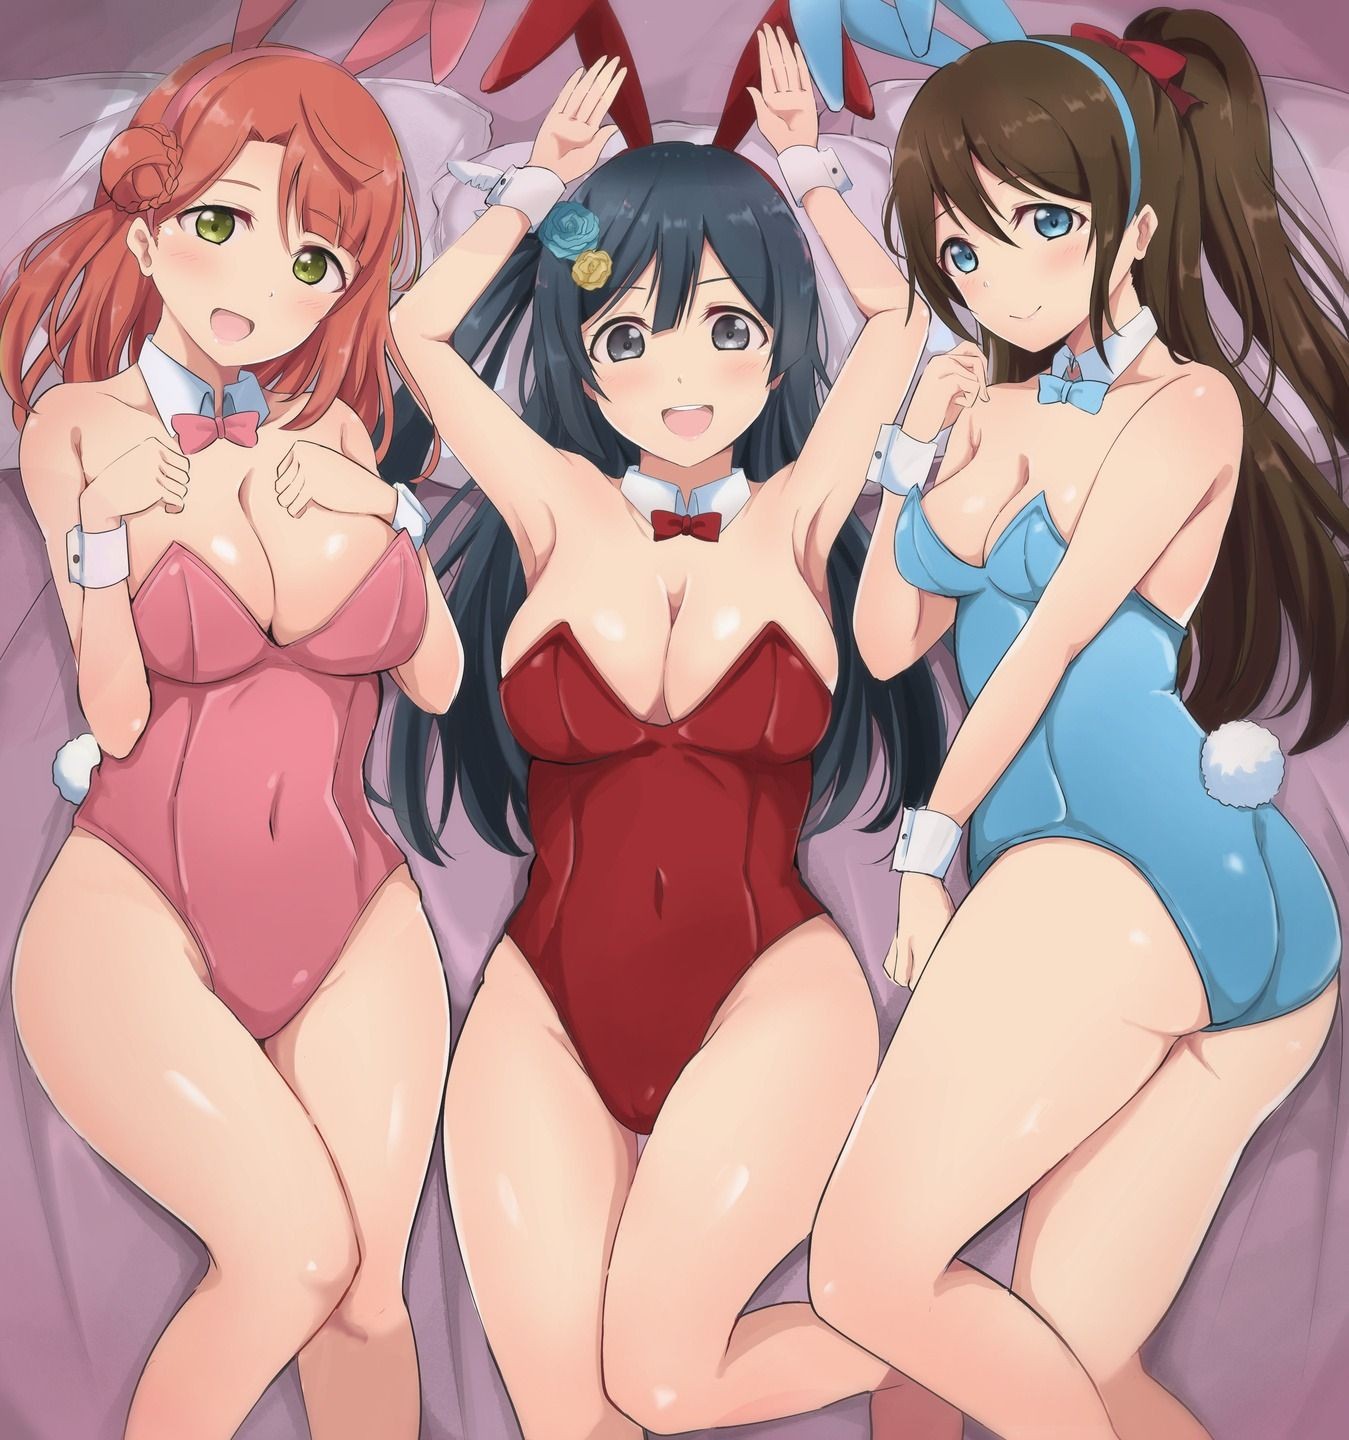 Free Rough Porn [Love Live! ] All-Star Member's Erotic Image 346th Bullet In Total Fake Tits